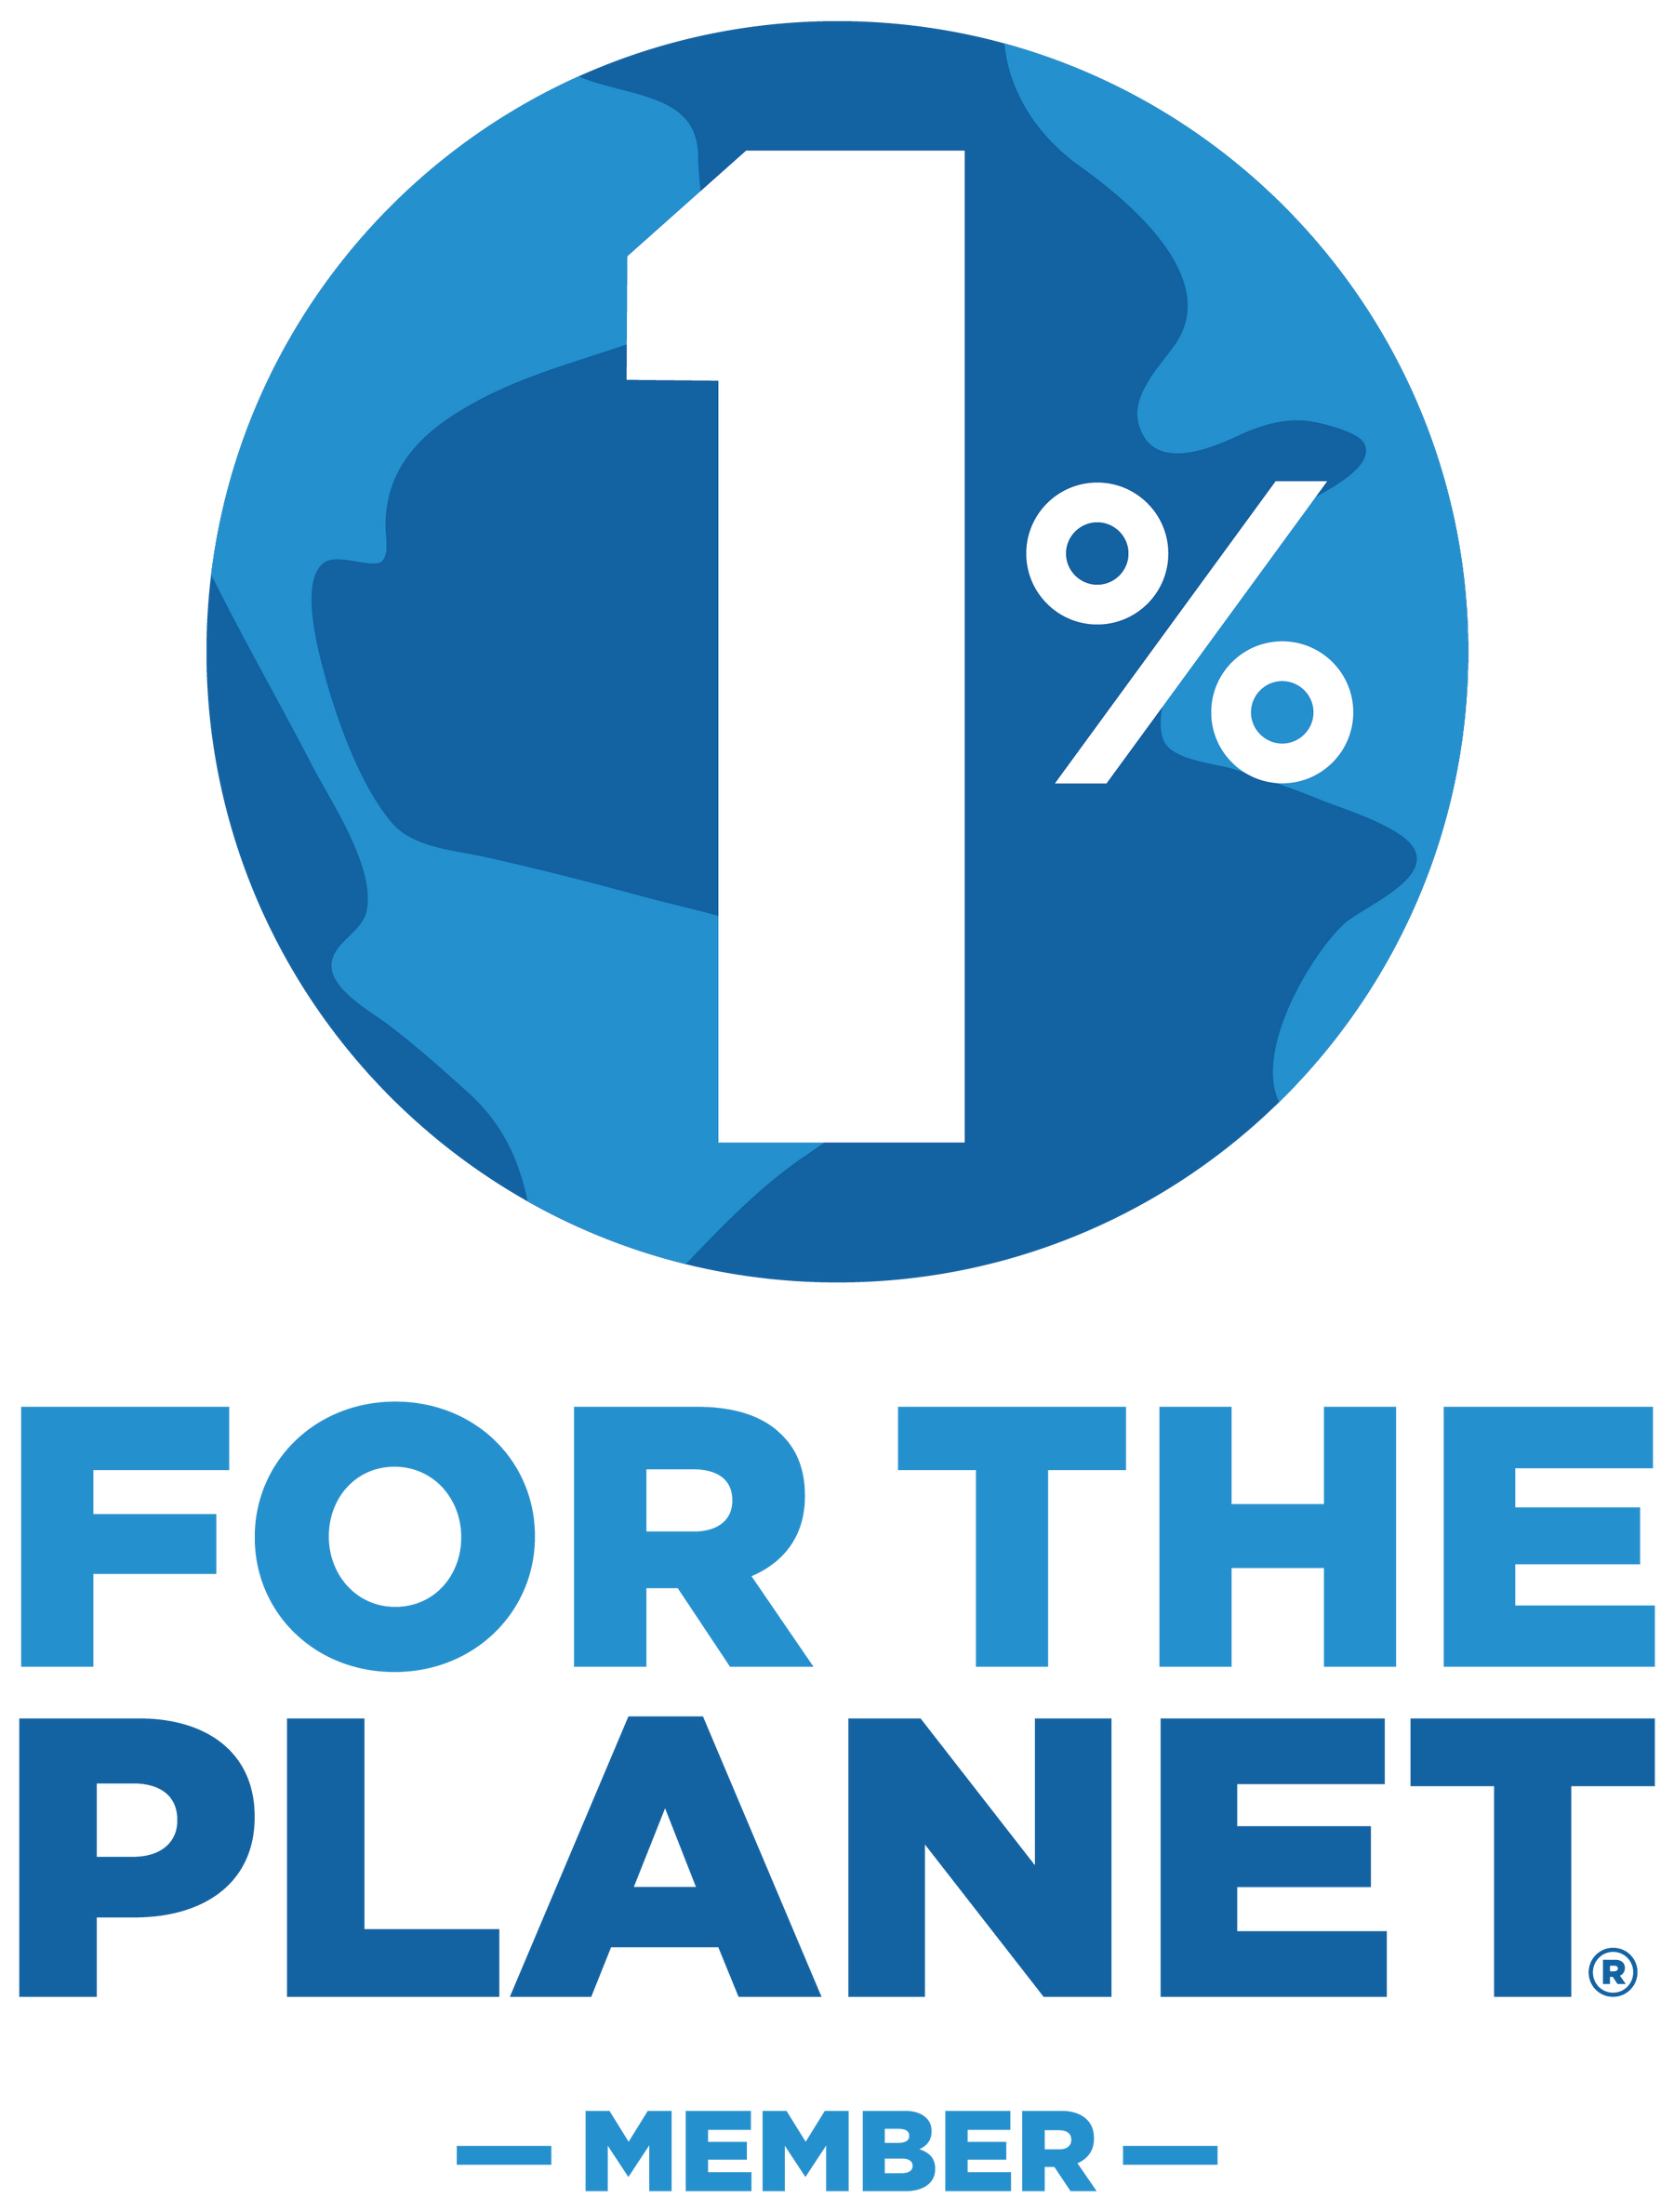 Heritage Bee Co. is a proud member of the 1% For The Planet organization giving back to our planet.